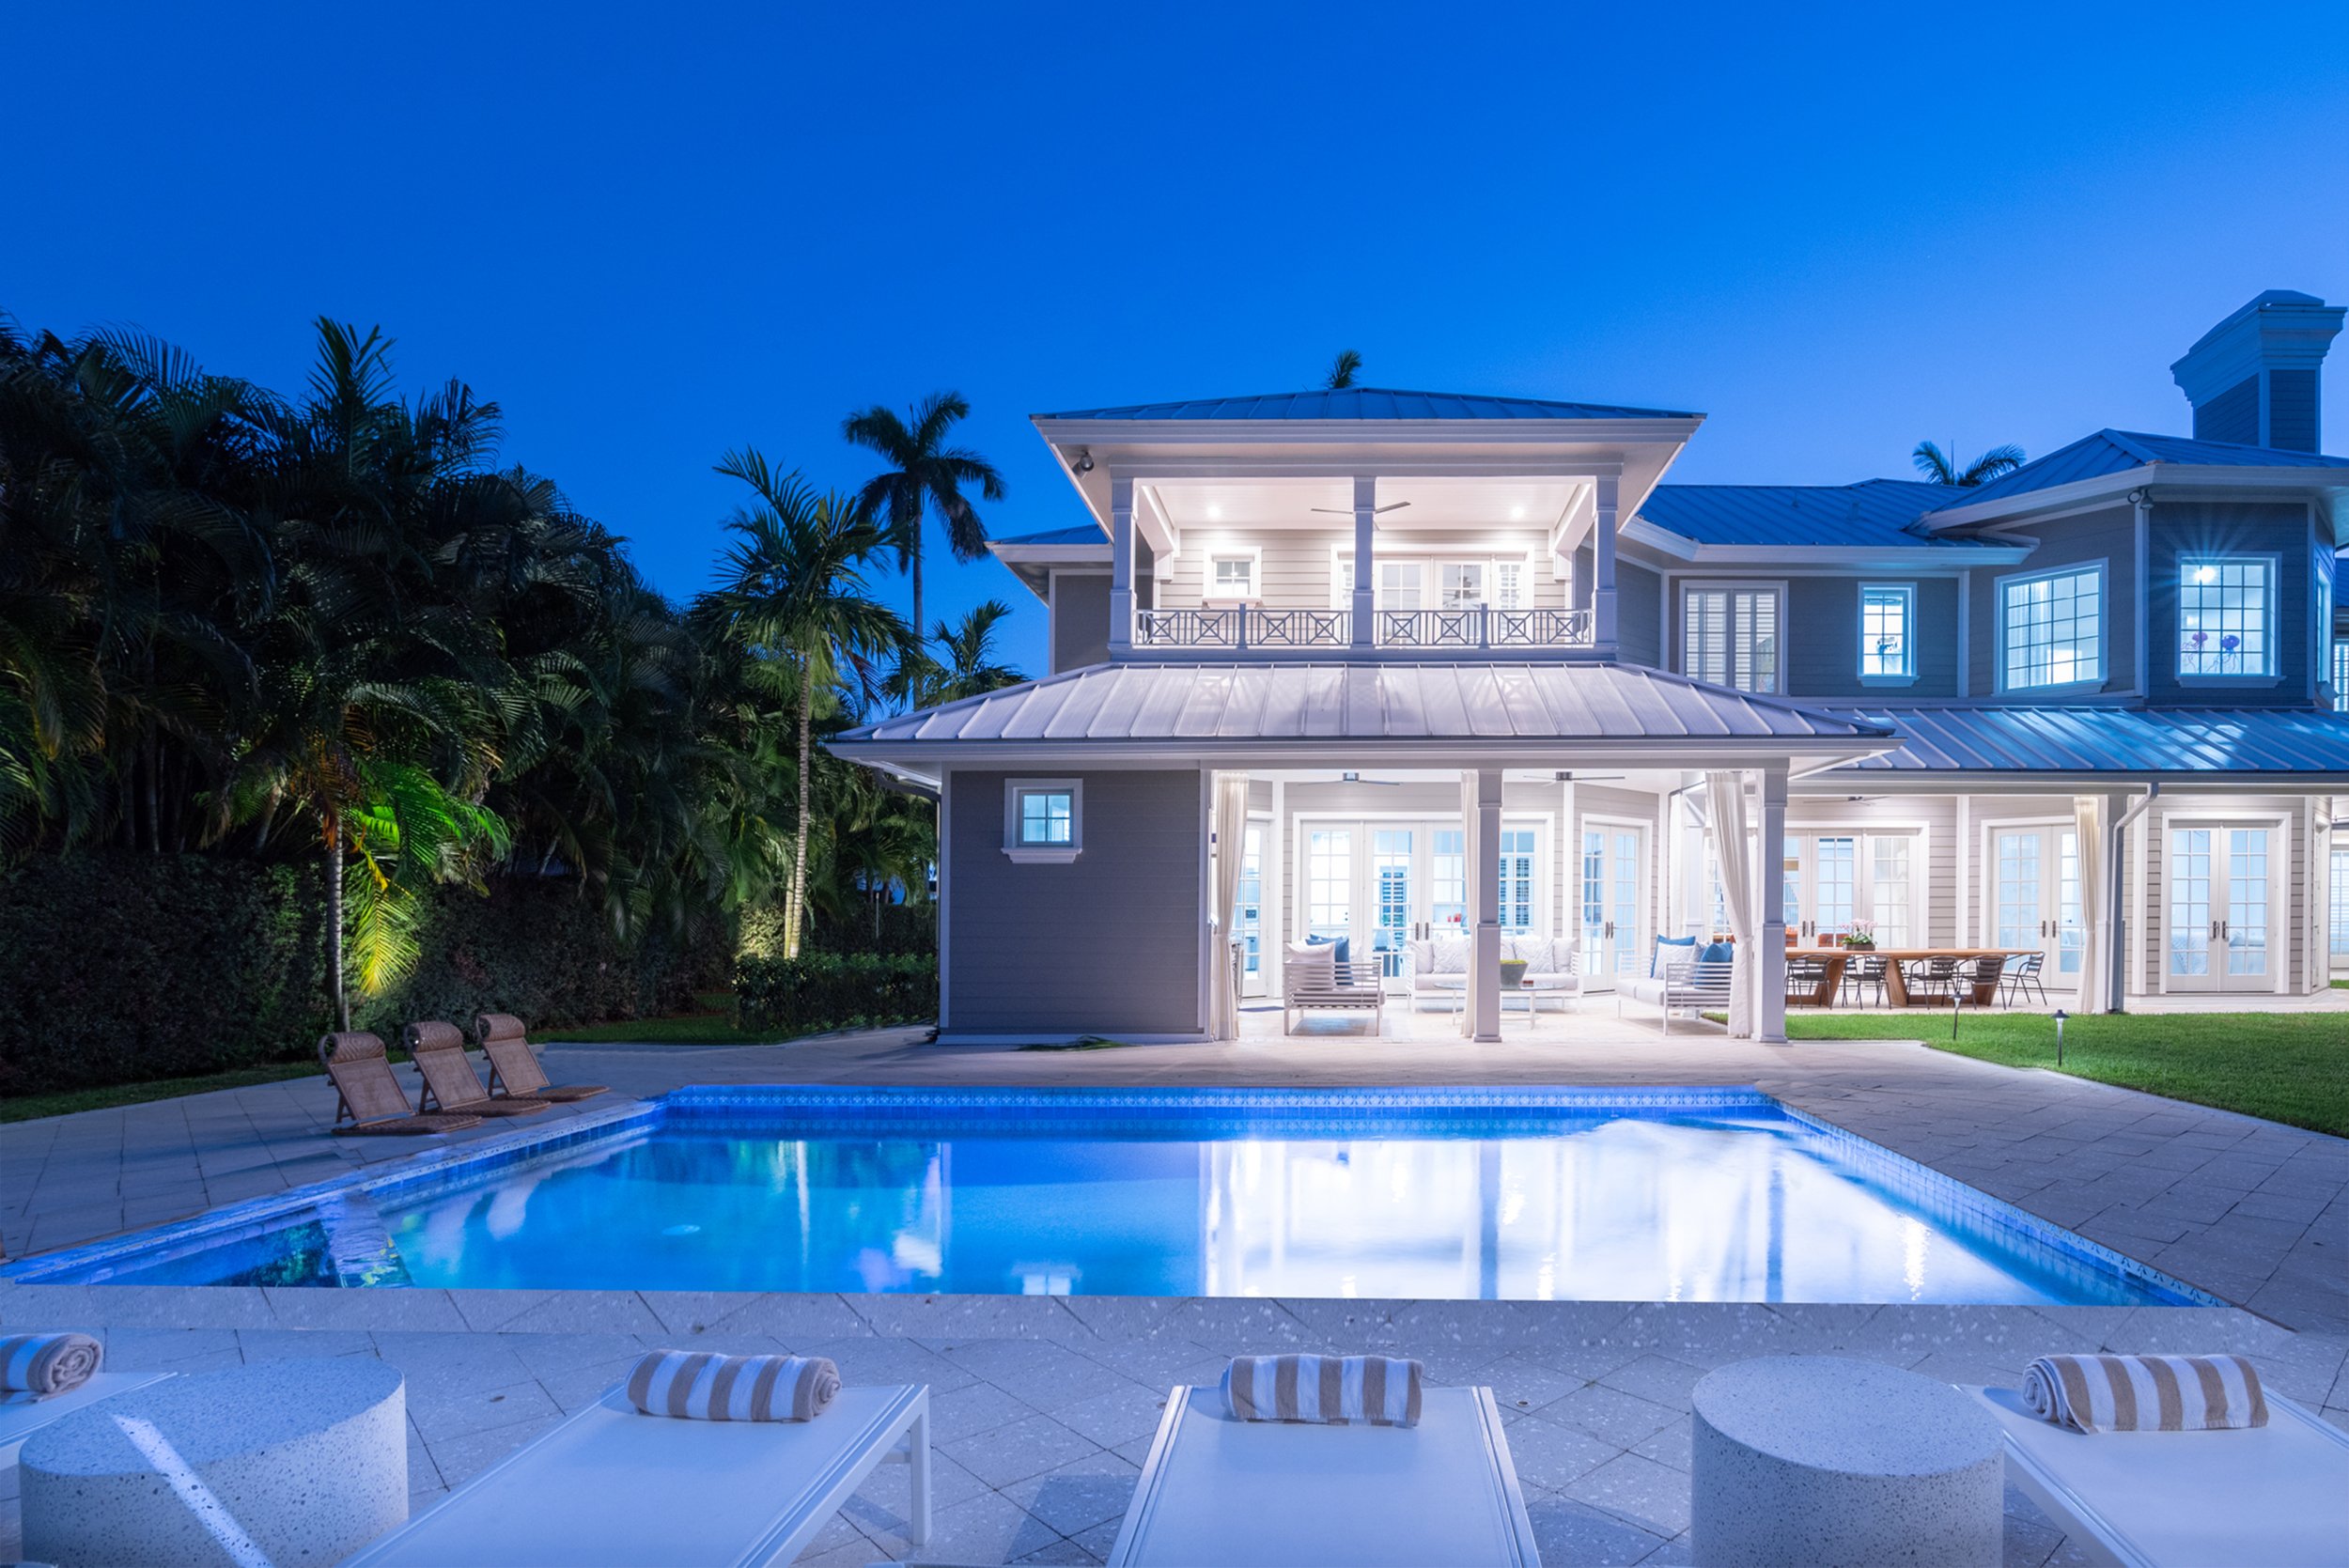 Check Out This Newly Renovated Coastal Contemporary In The Exclusive Point Manalapan Which Just Listed For $7.995 Million42.jpg